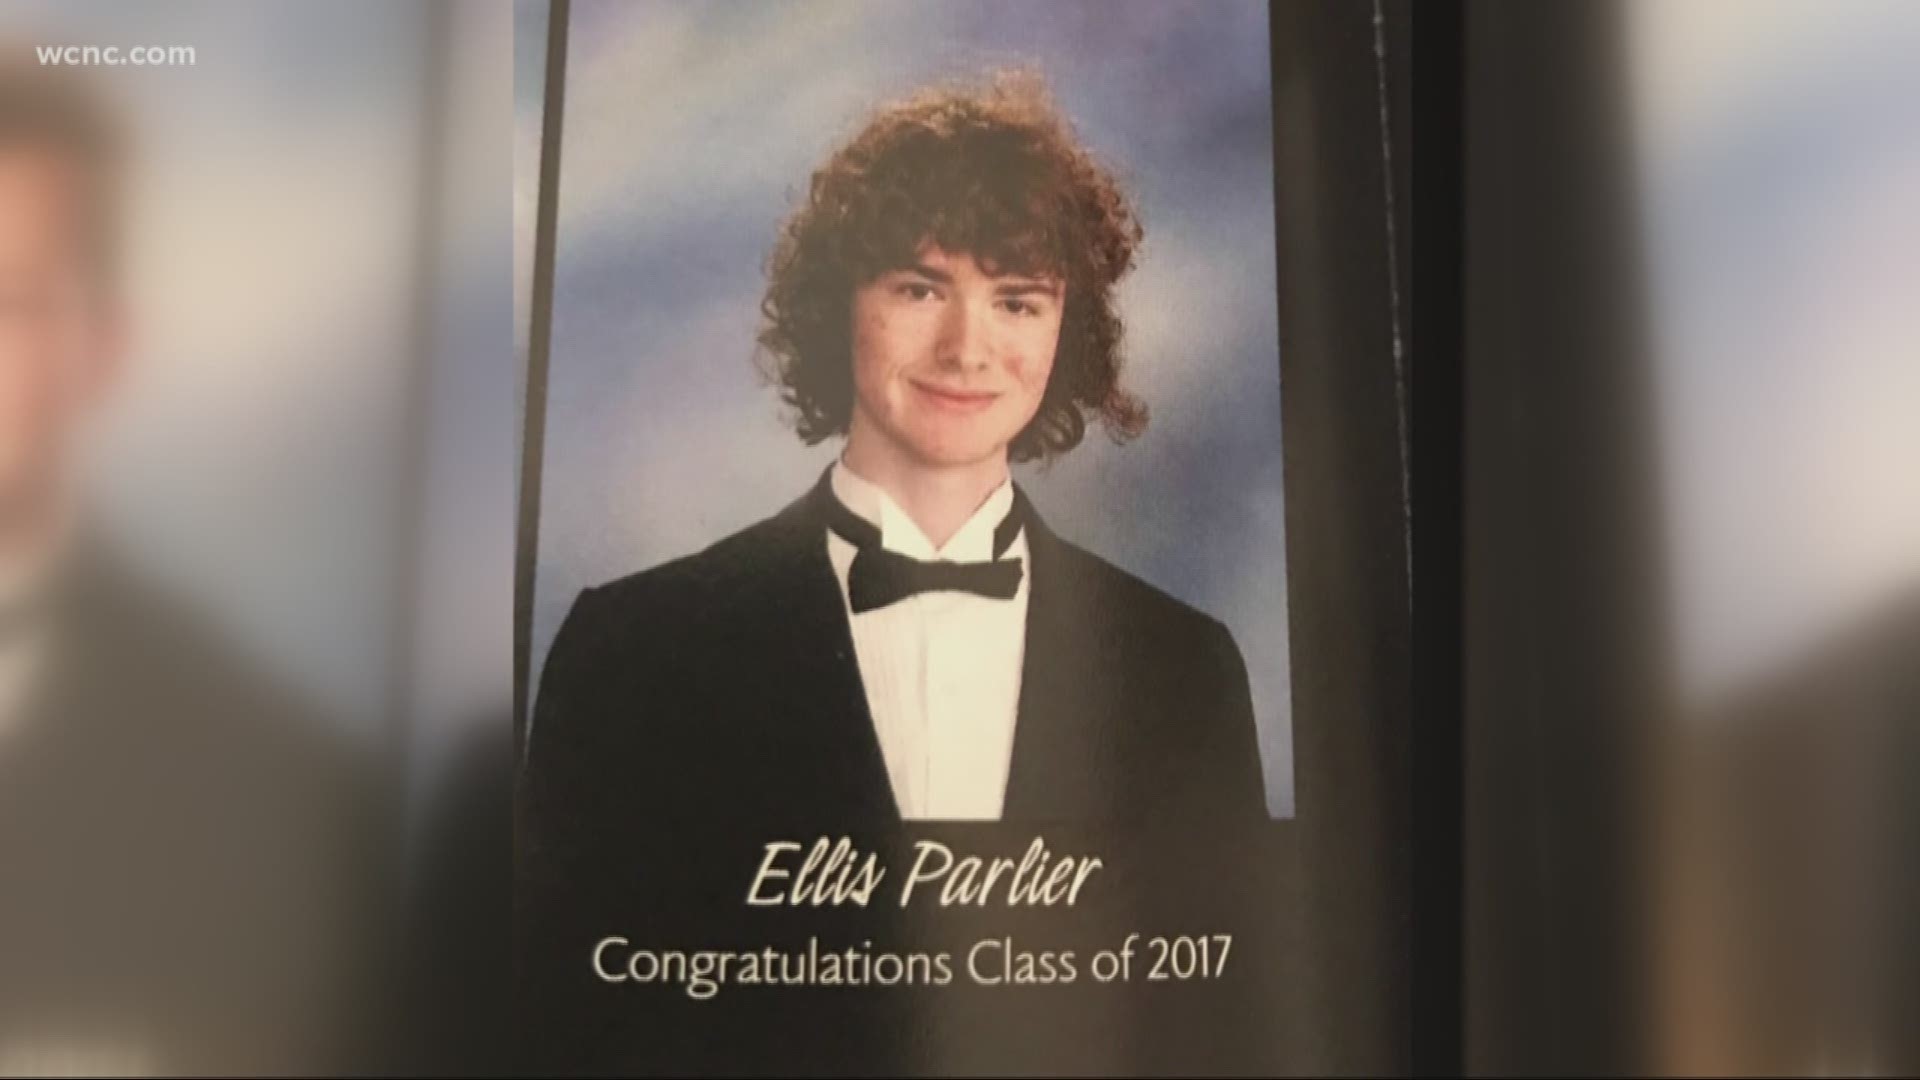 A high school classmate of his said Reed Parlier was an incredibly bright honors student, talented particularly when it came to computers.